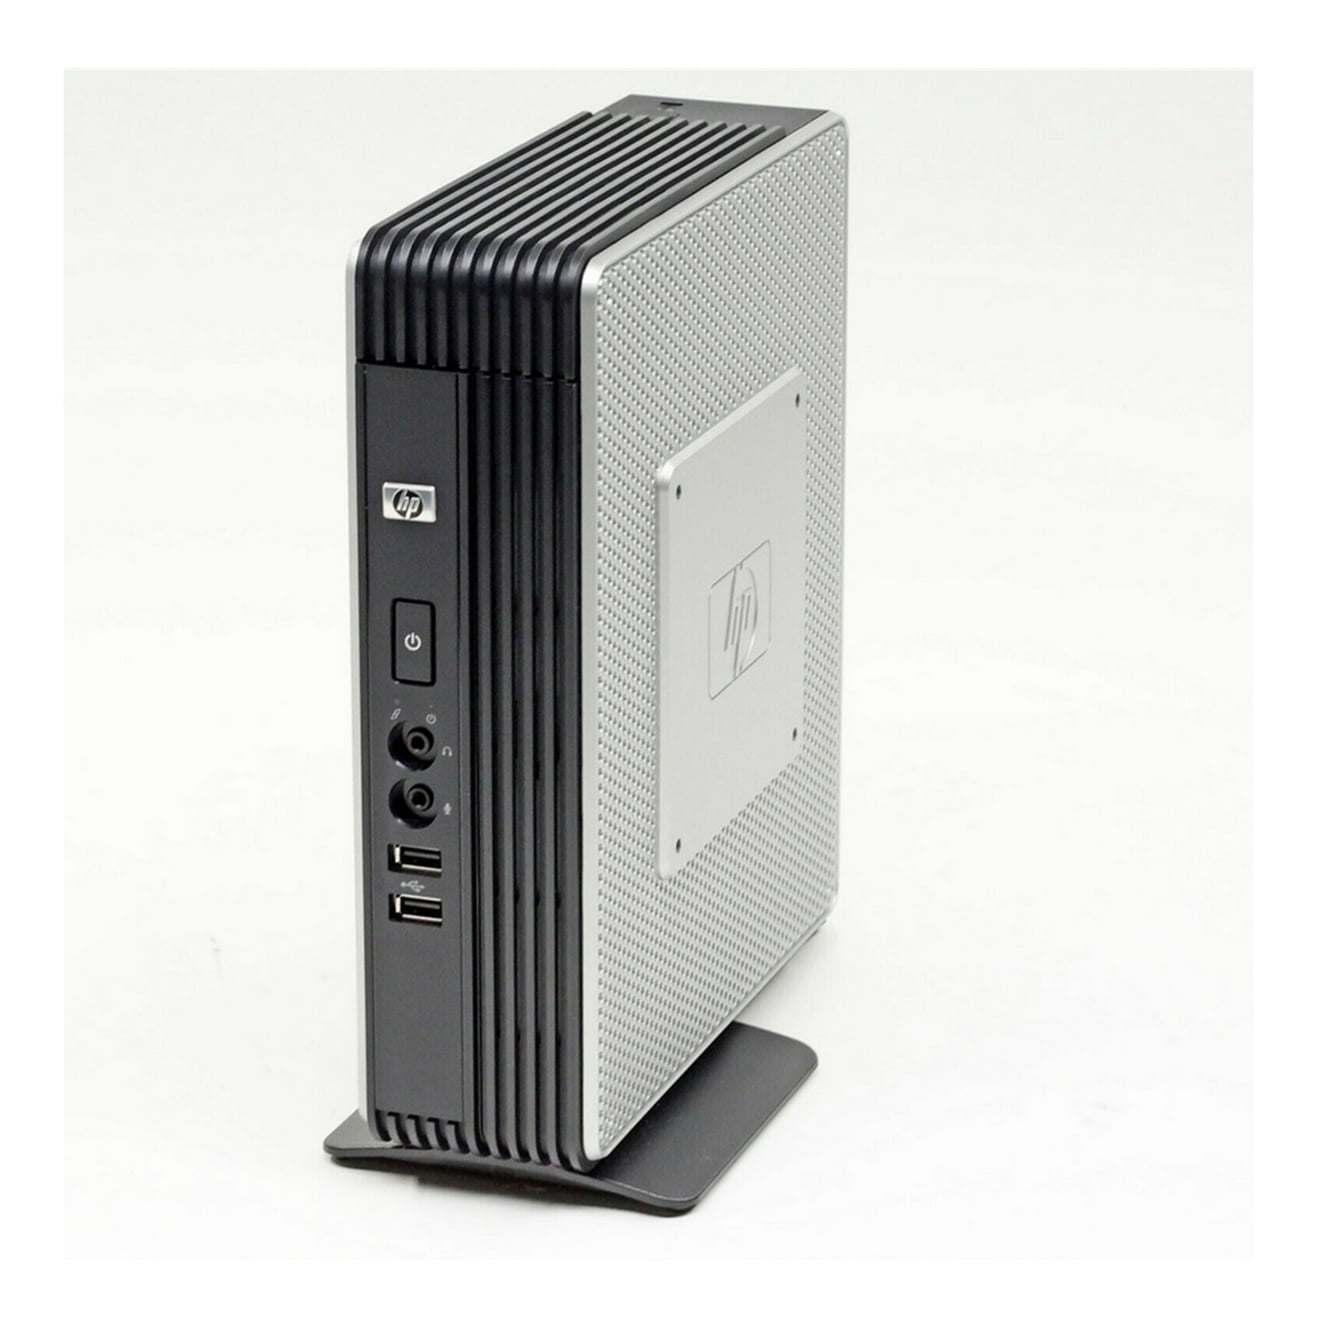 HP GT7725 Thin Client AMD Turion X2 2.3GHz 2GB 1GB Linux Quad NG816AA#ABA (New Open Box)